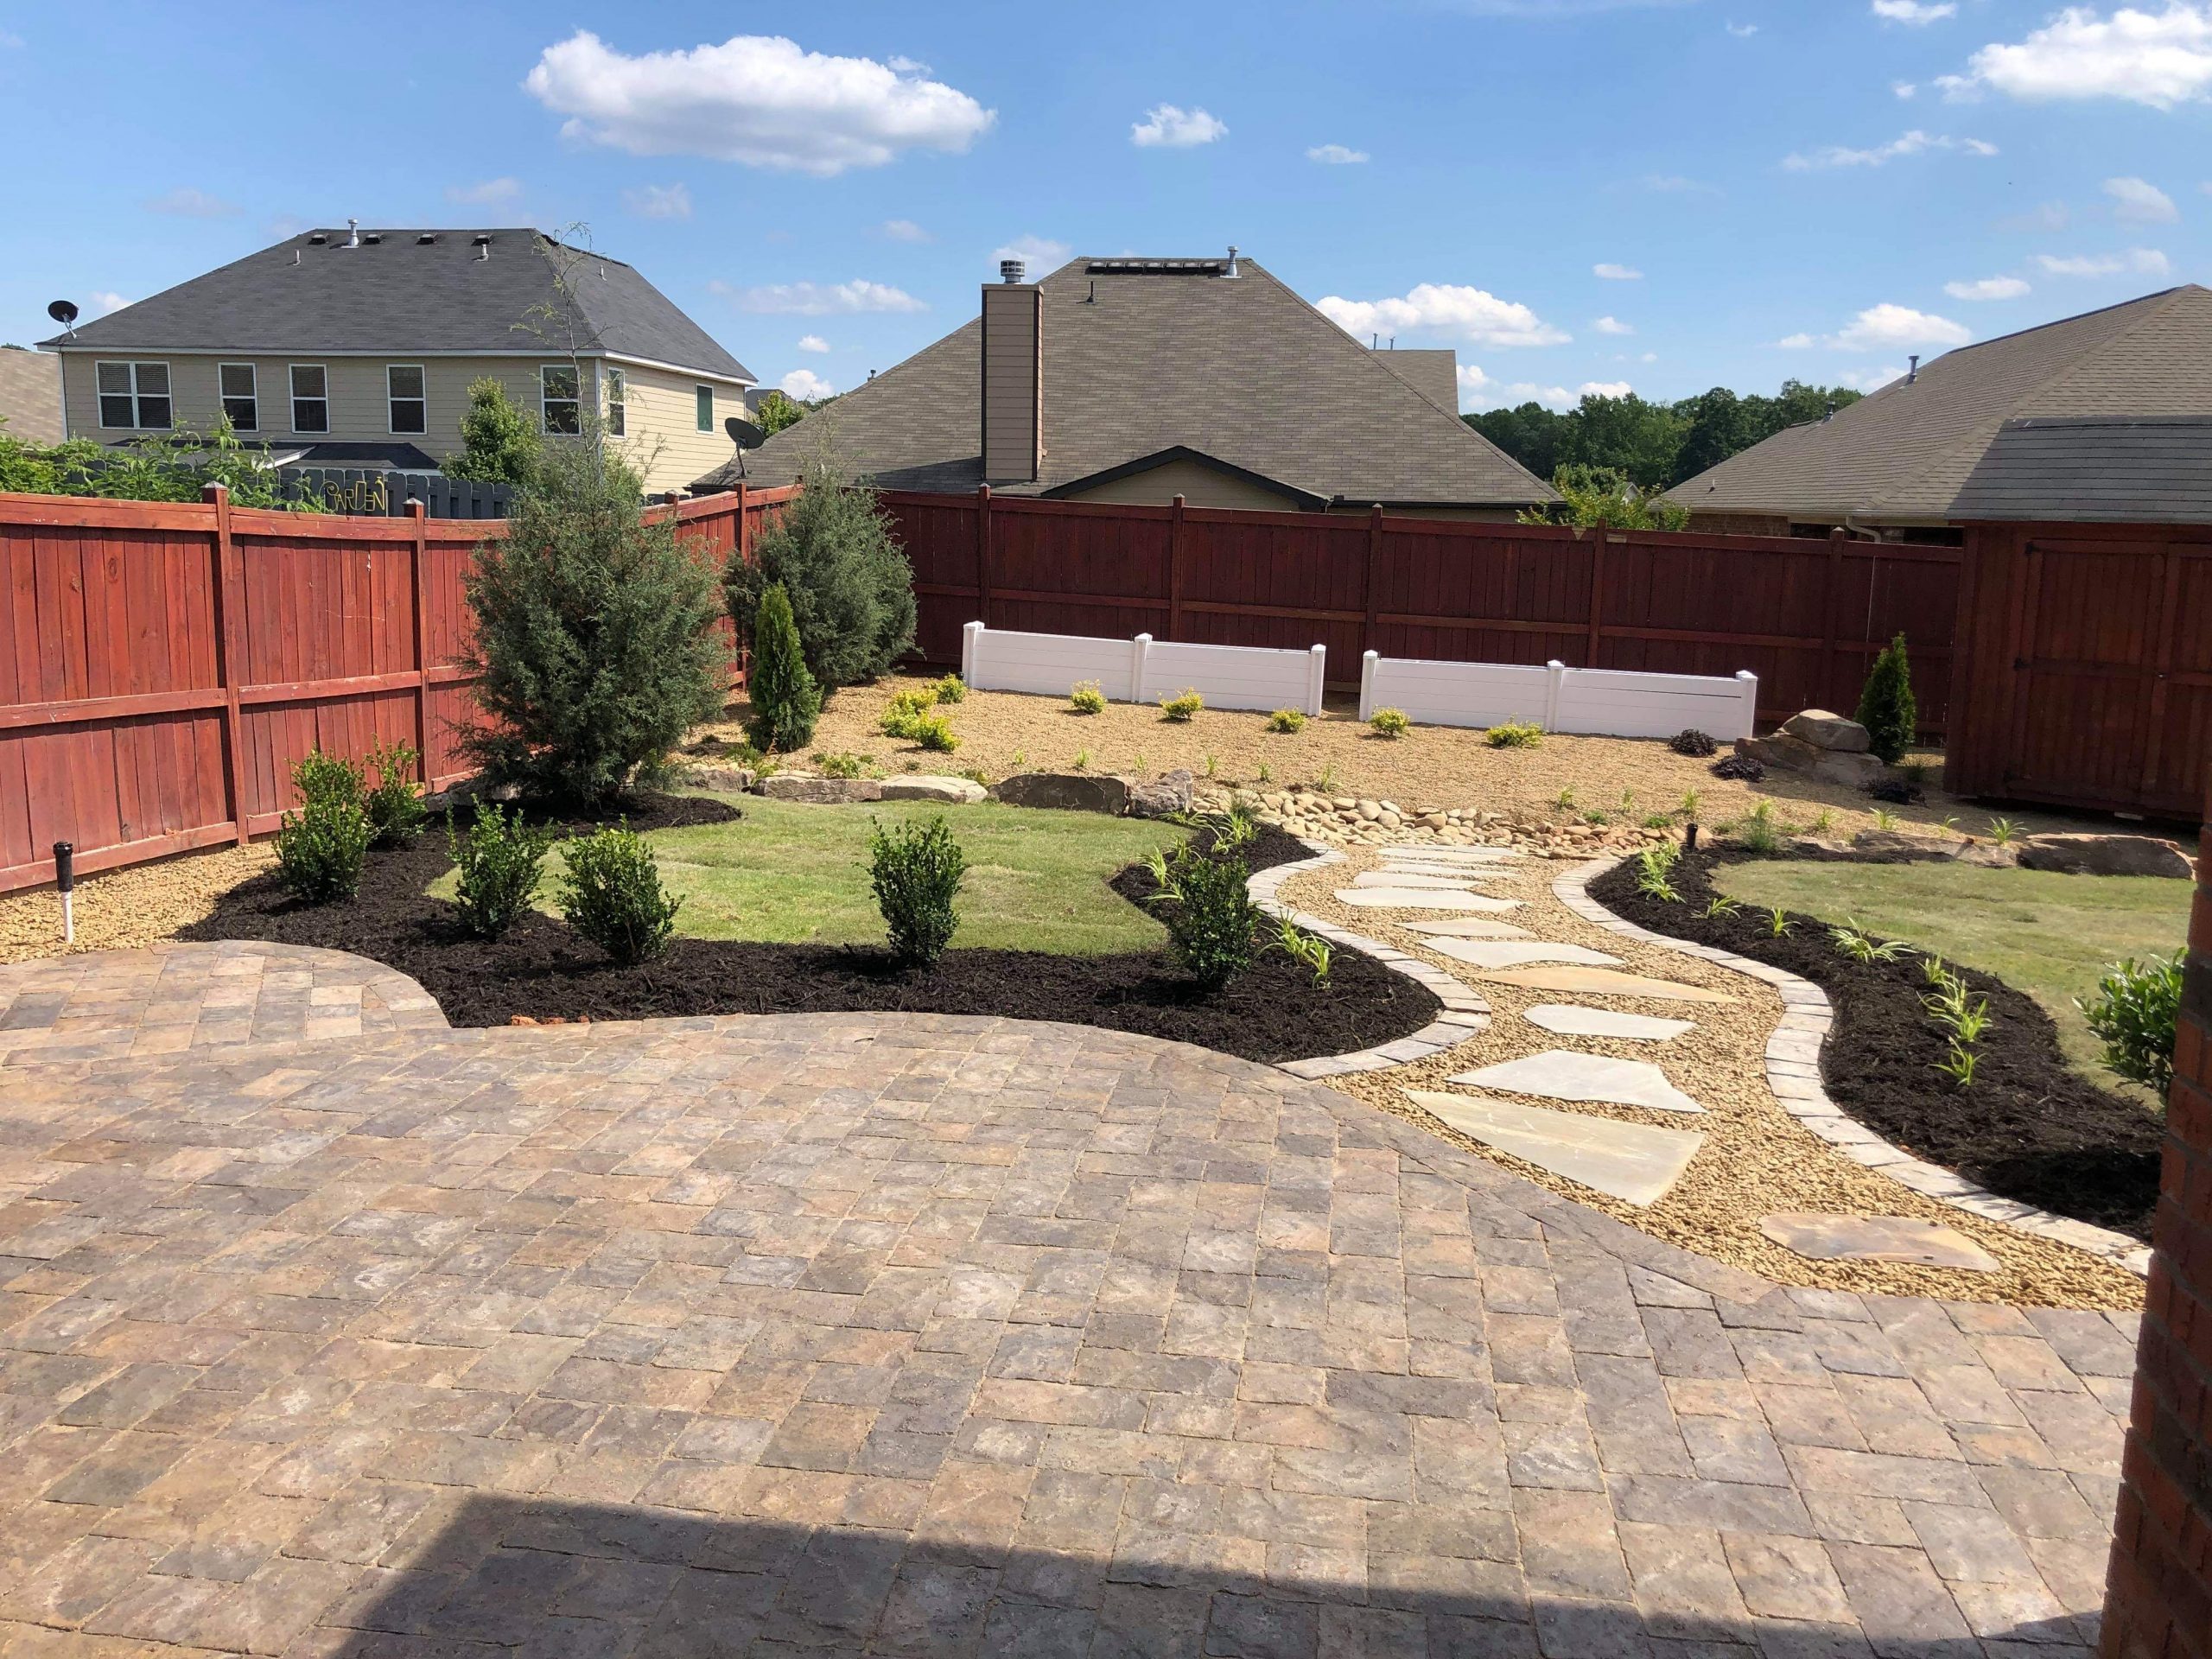 Top 10 Best Patio Pavers In Greenville Sc | Angi [Angie'S tout Paver Patio Hendersonville Nc